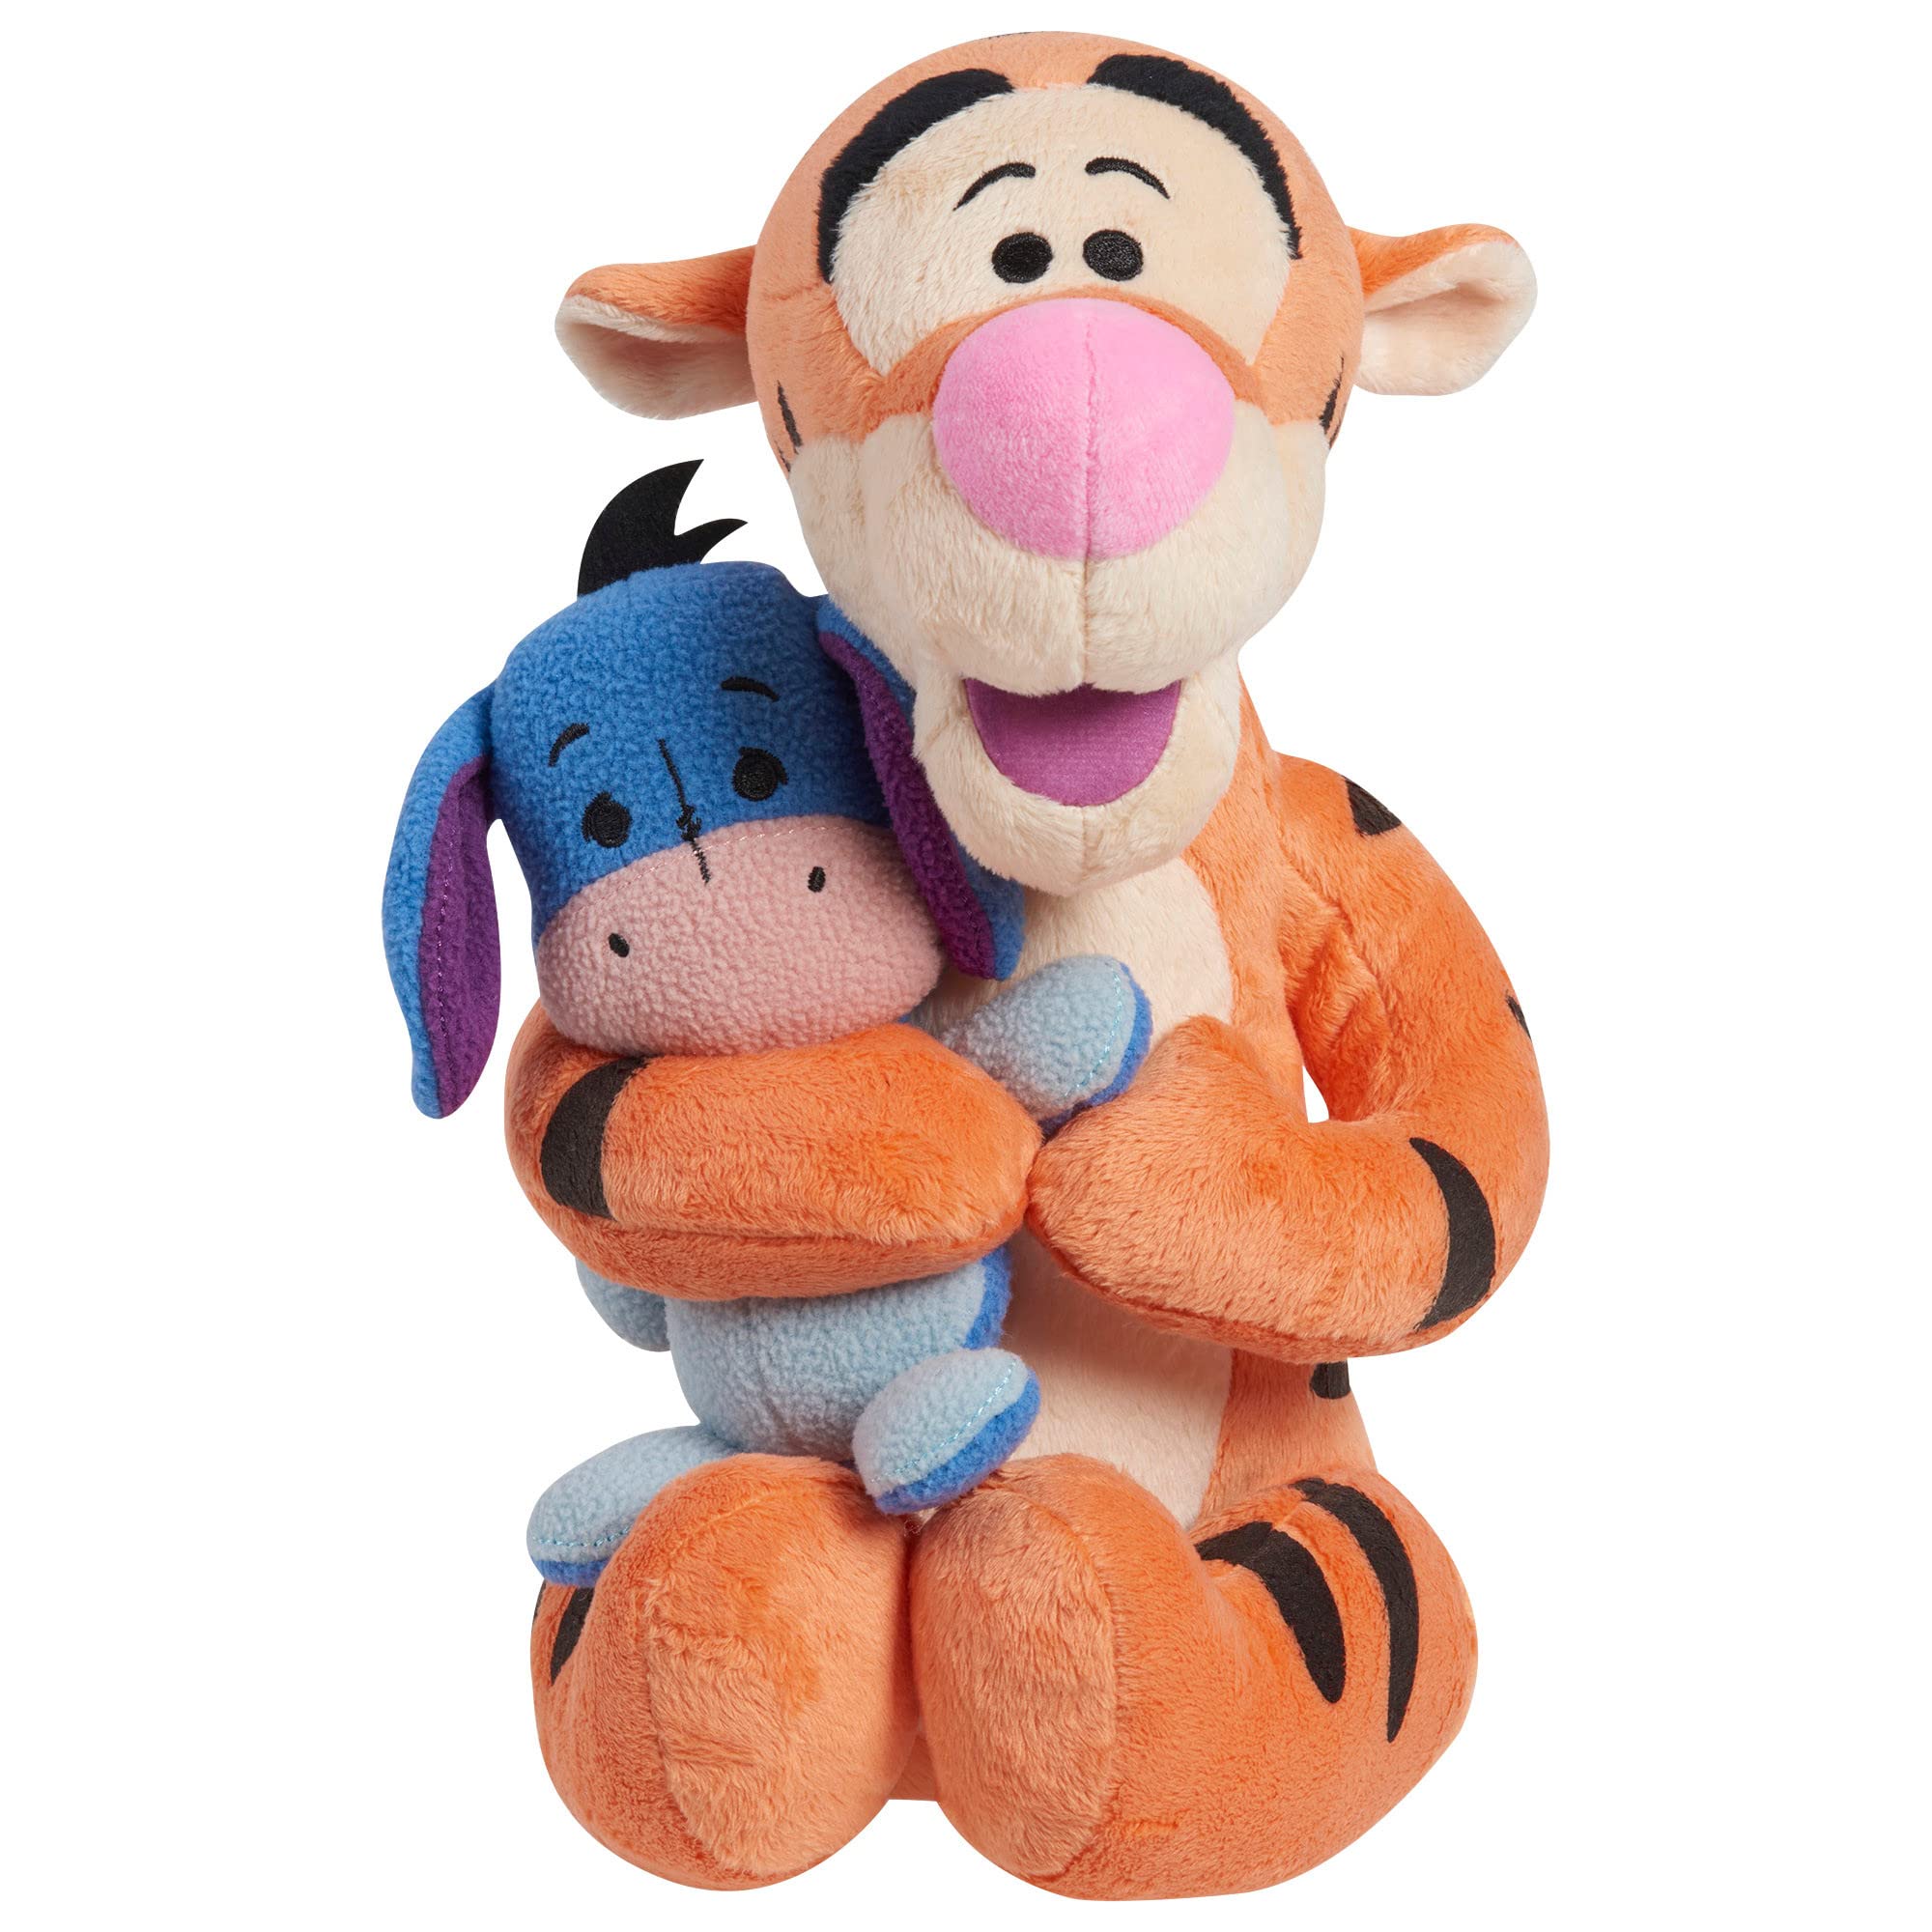 DISNEY CLASSIC Lil Friends Tigger and Eeyore Plushie Stuffed Animal, Officially Licensed Kids Toys for Ages 0+, Gifts and Presents by Just Play